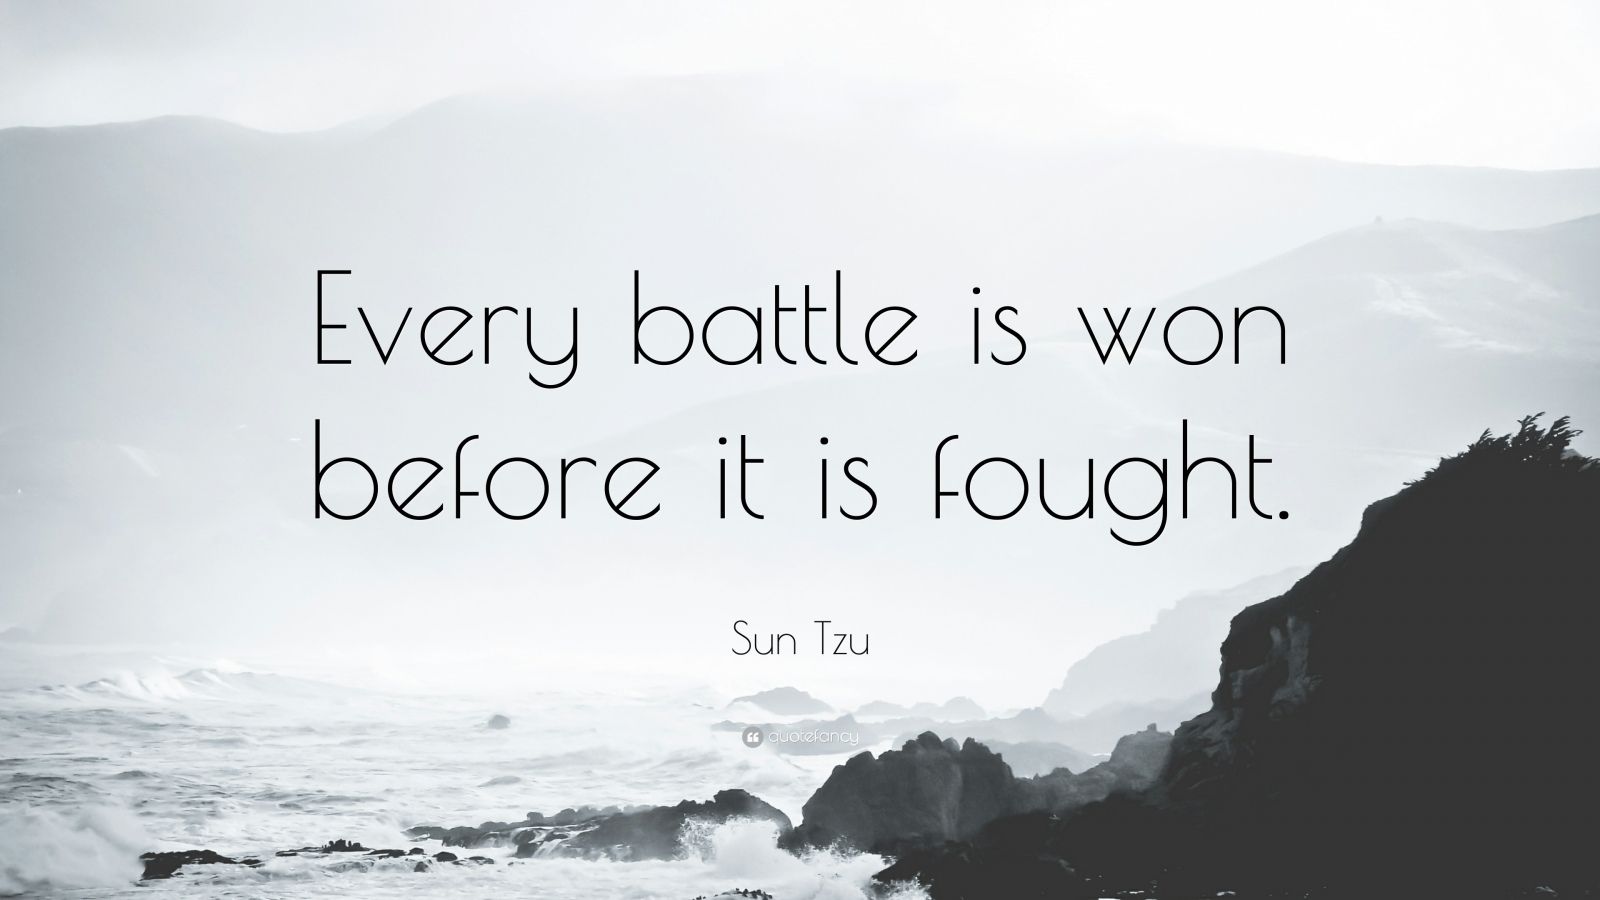 Sun Tzu Quote: “Every battle is won before it is fought.” (12